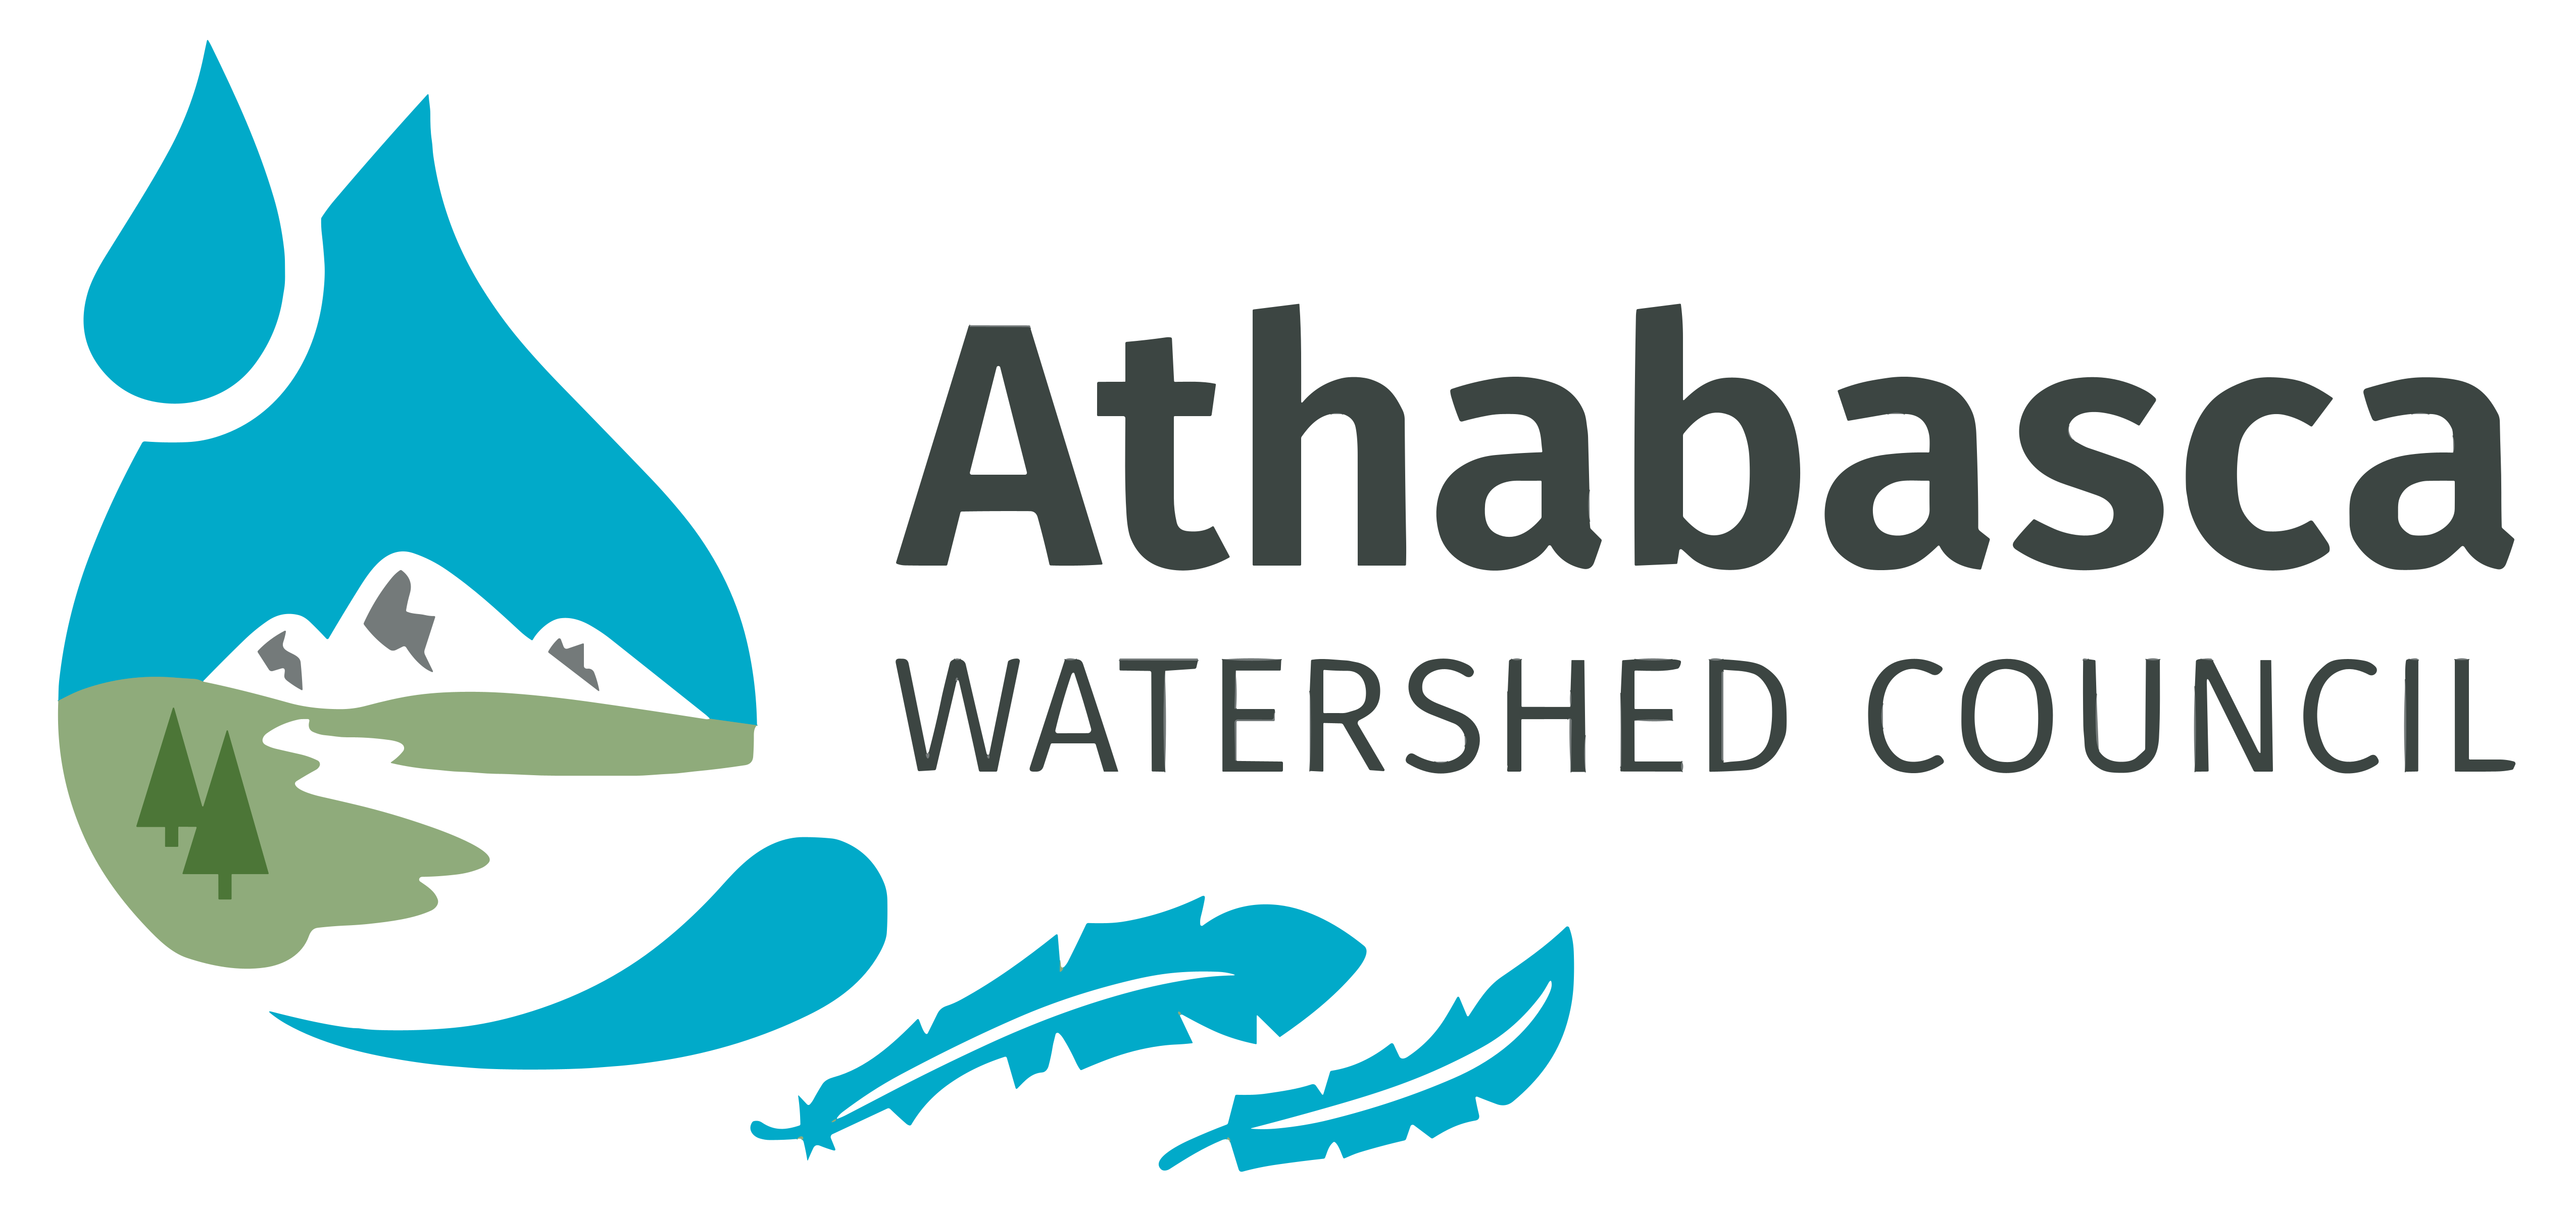 Logo for Athabasca Watershed Council on a transparent background